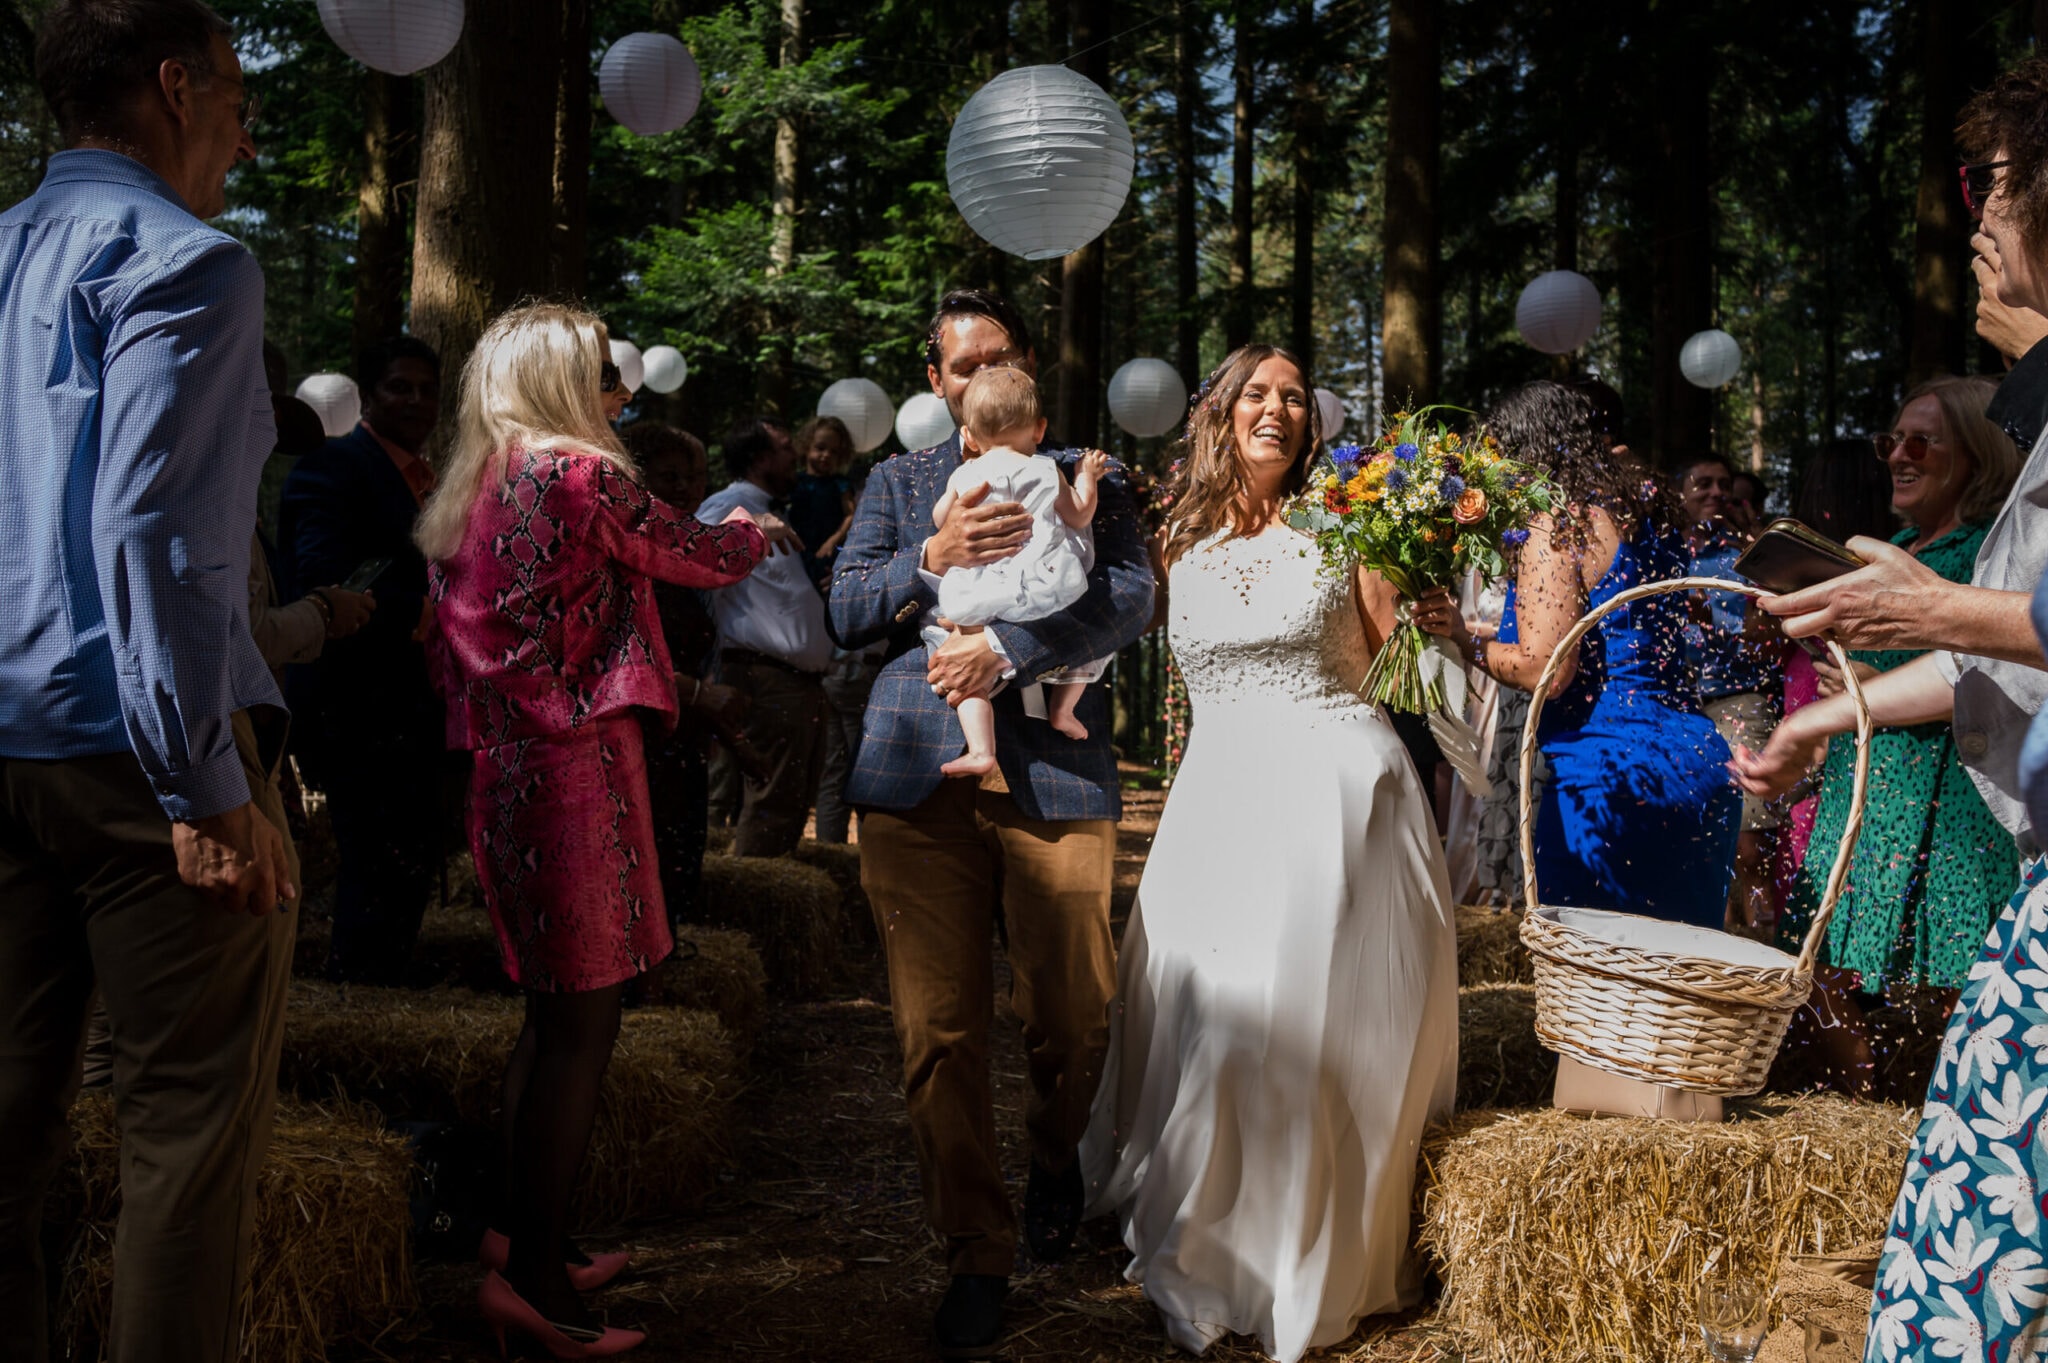 Outdoor ceremony at Weddings in the Wood